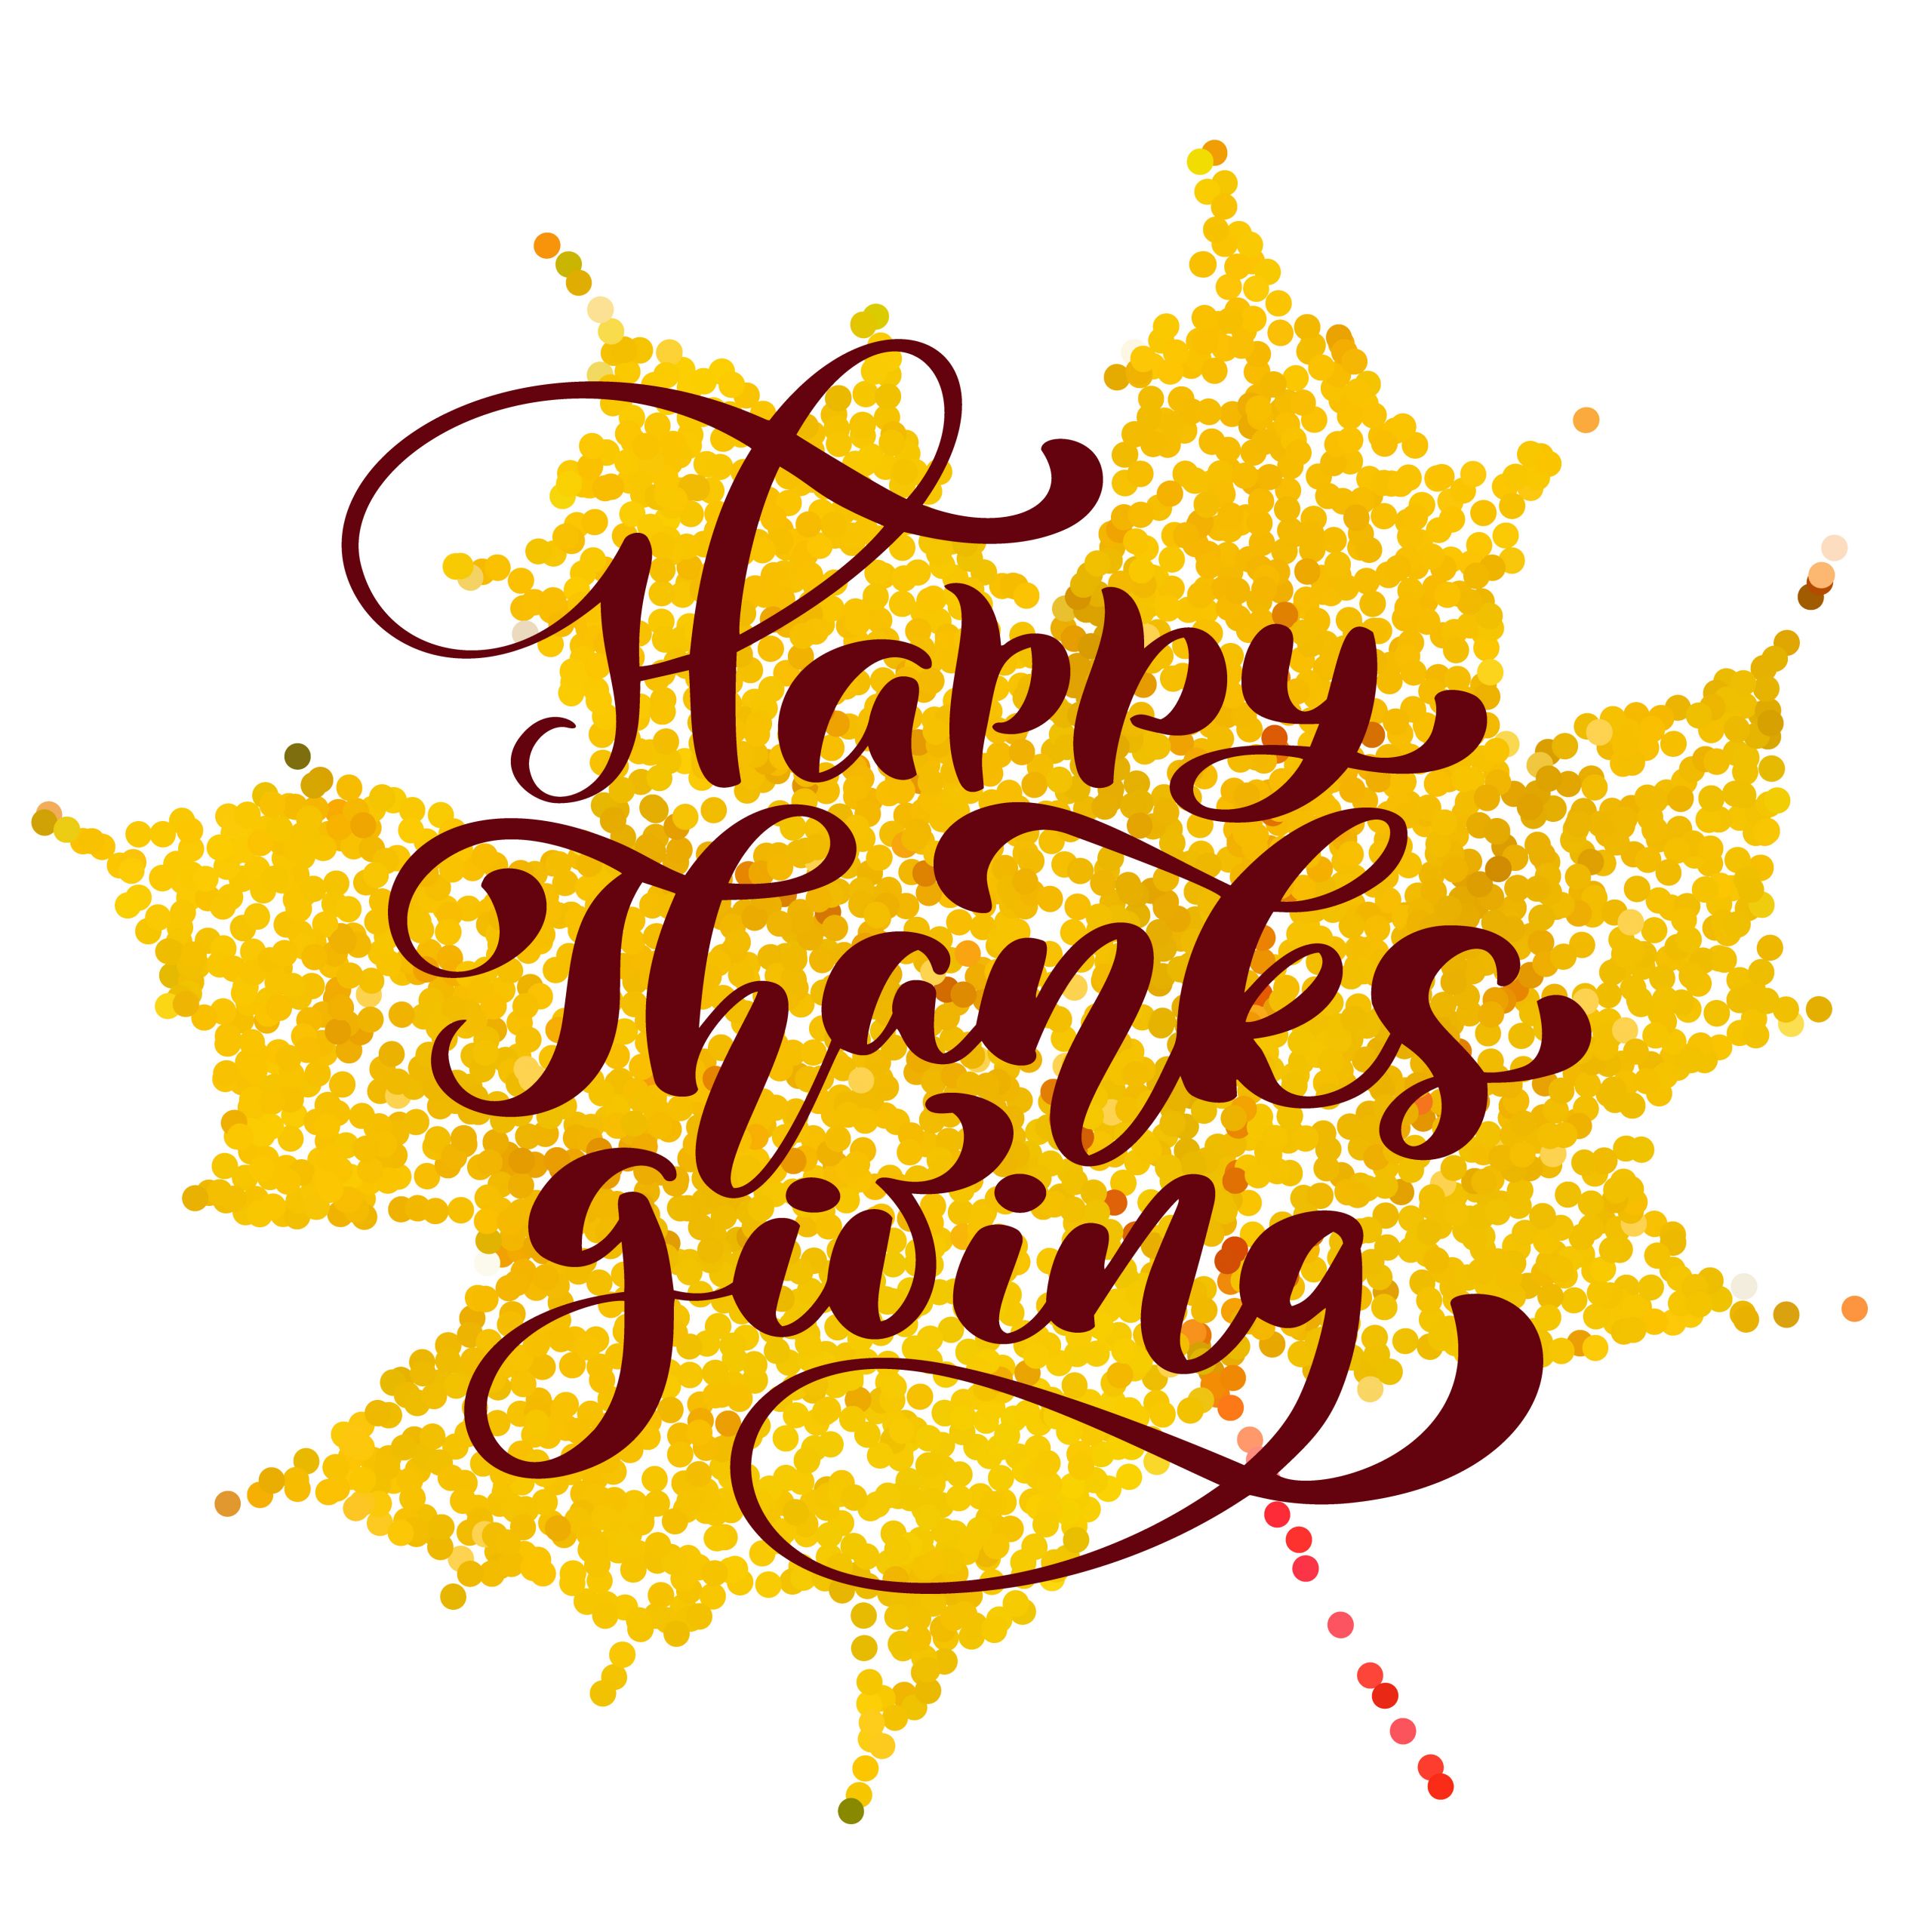 Thanksgiving Quotes Calligraphy
 Happy Thanksgiving Calligraphy Text on yellow stilized